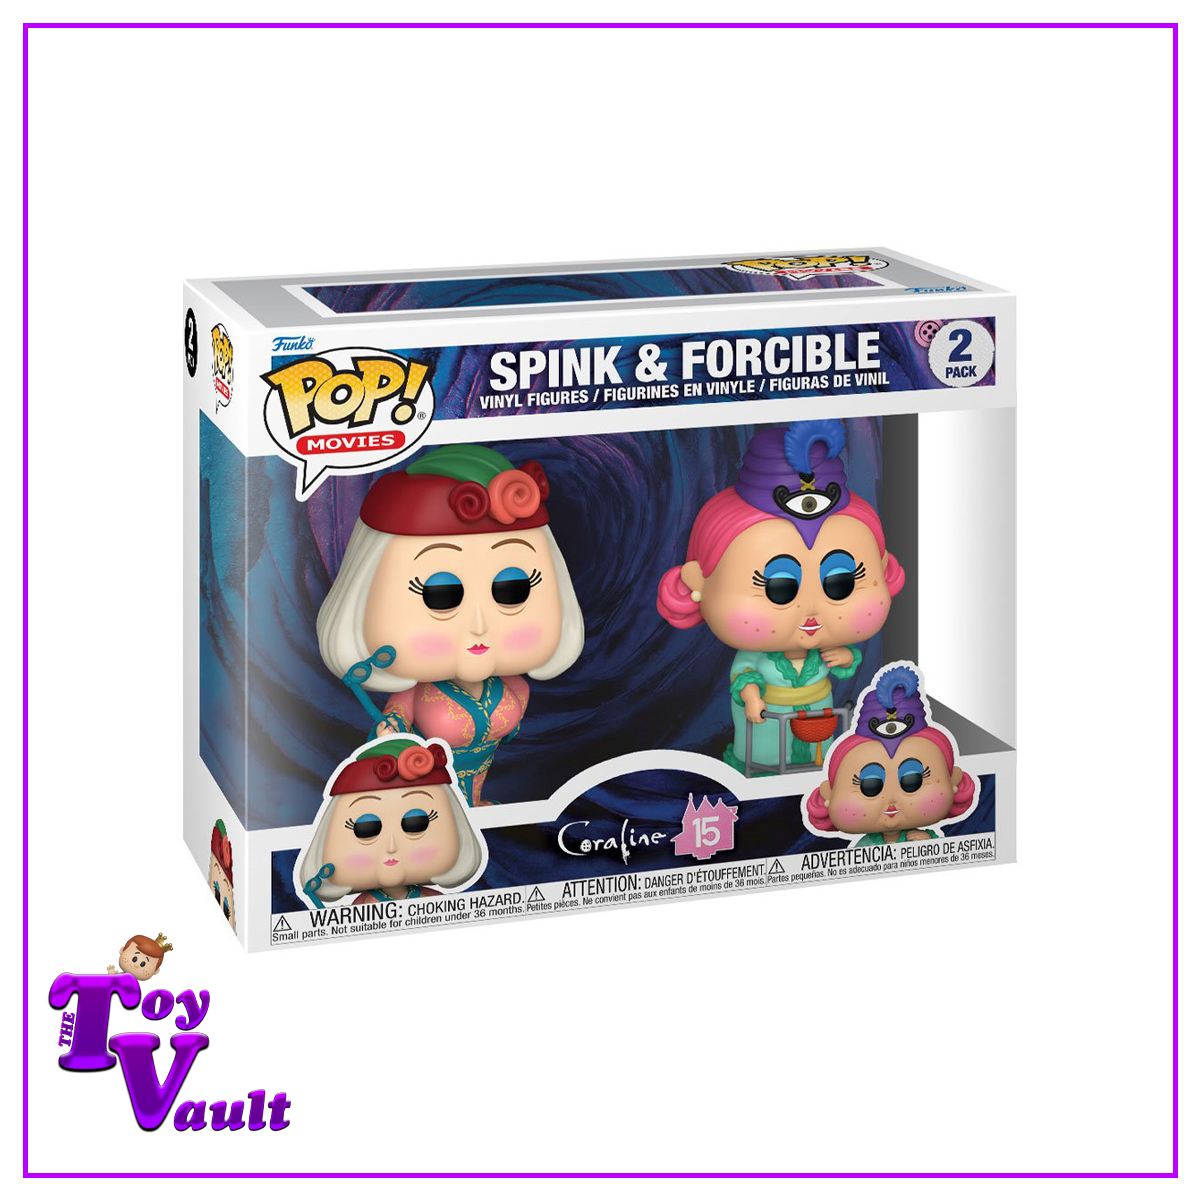 Funko Pop! Horror Movies Coraline 15th Anniversary - Spink & Forcible (2 Pack) Preorder